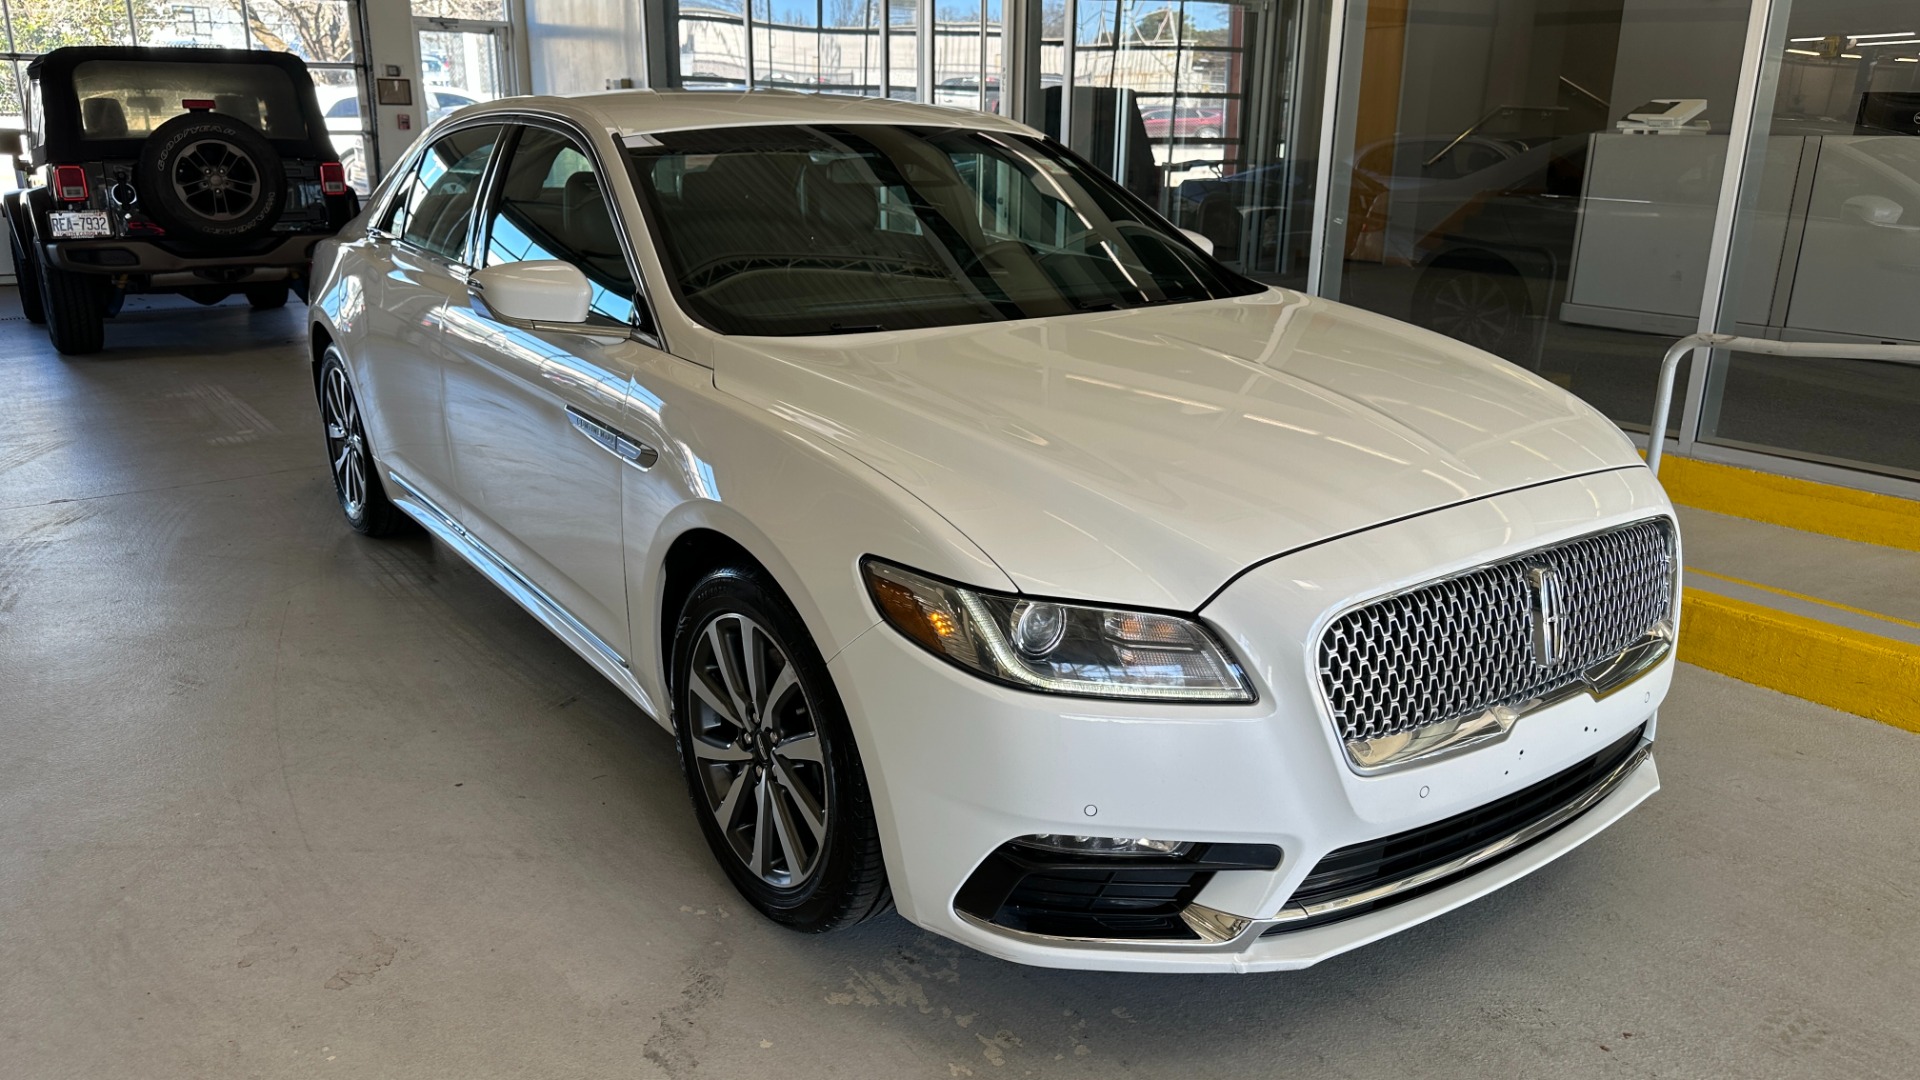 Used 2020 Lincoln Continental STANDARD / LEATHER / HEATED SEATS / BACKUP CAMERA / V6 ENGINE for sale $26,995 at Formula Imports in Charlotte NC 28227 2